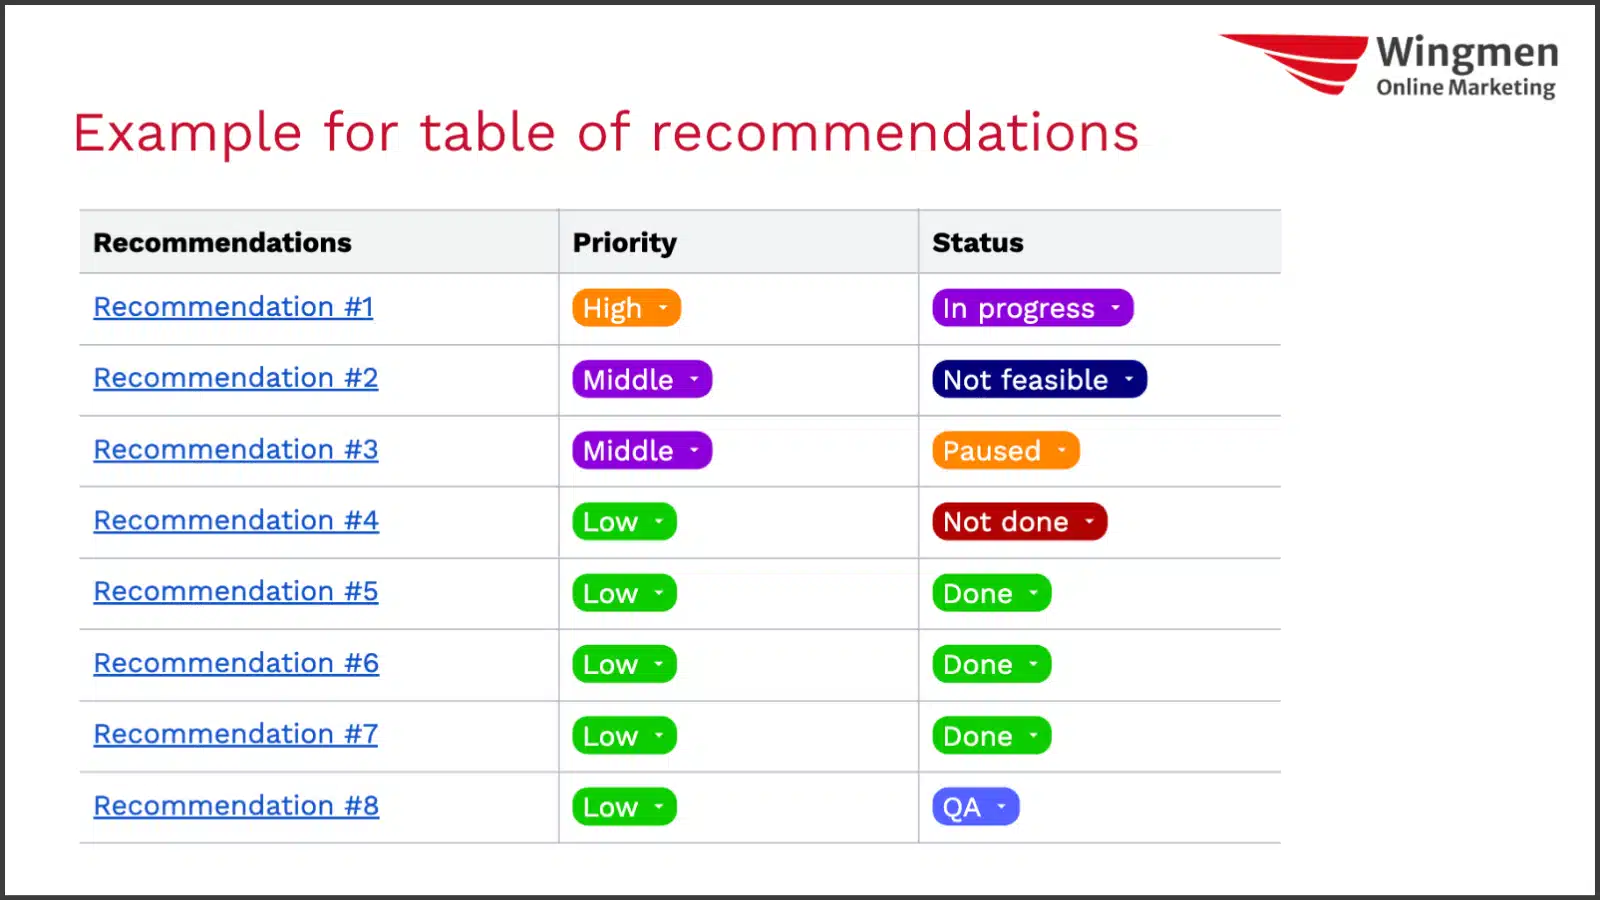 An example for a table of recommendations. The image shows a table with 3 columns: Recommendations, Priority, and Status. Each recommendation is a clickable link, to jump to the appropriate section of the audit document.